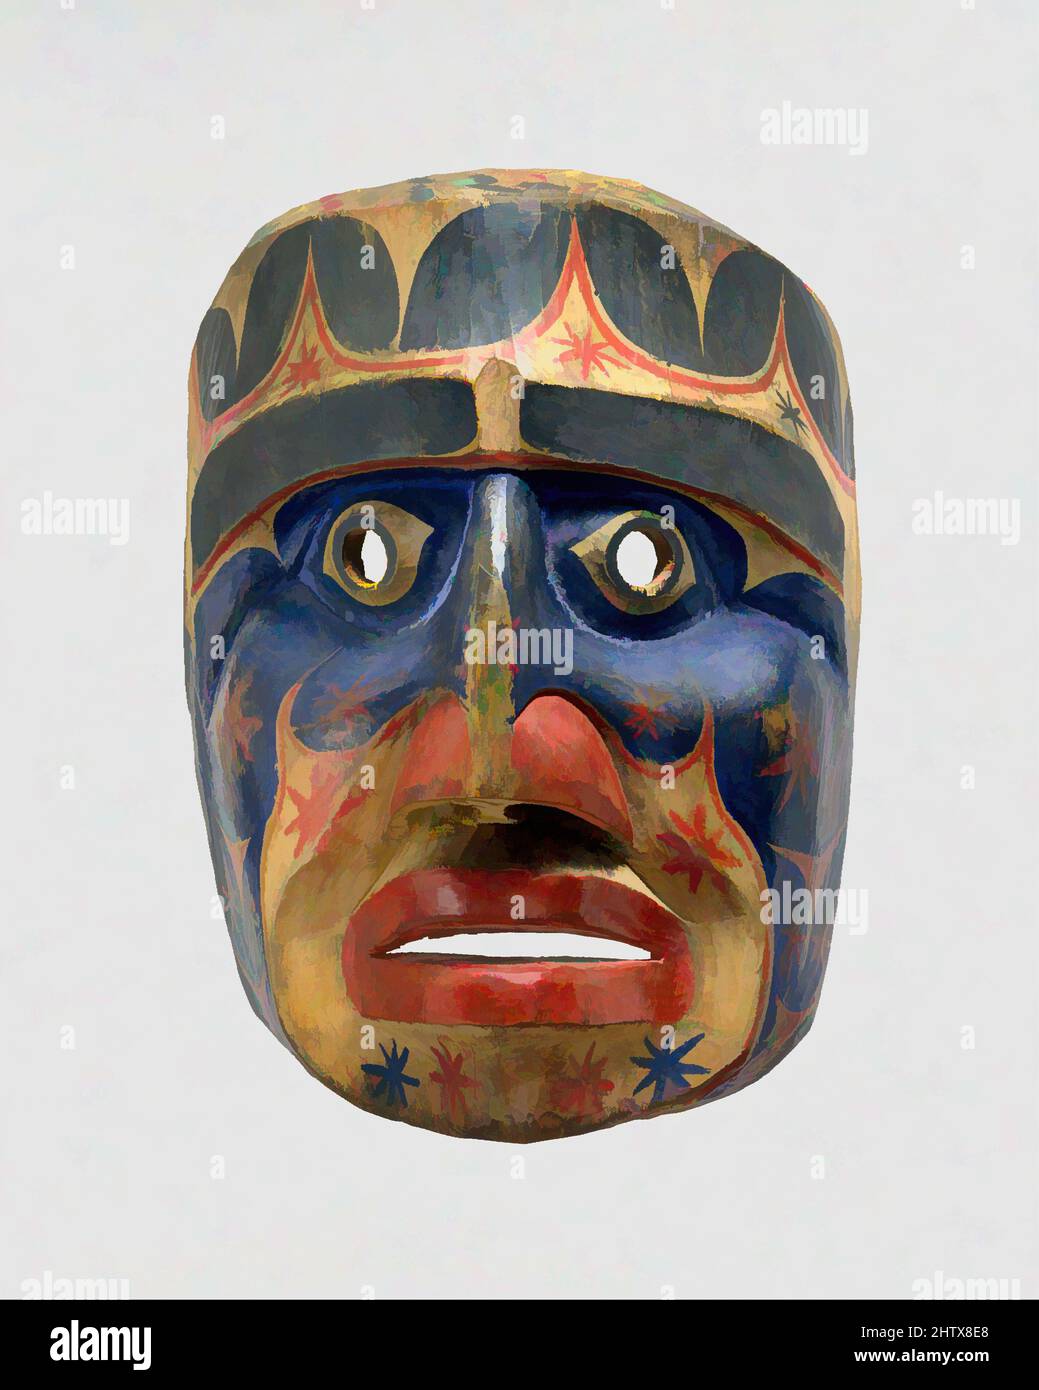 Art inspired by Komokwa Mask, 1880–90, Canada, British Columbia, Kwakwaka’wakw (Kwakiutl), Wood, pigment, H. 15 x W. 12 in. (38.1 x 30.5 cm), Wood-Sculpture, Classic works modernized by Artotop with a splash of modernity. Shapes, color and value, eye-catching visual impact on art. Emotions through freedom of artworks in a contemporary way. A timeless message pursuing a wildly creative new direction. Artists turning to the digital medium and creating the Artotop NFT Stock Photo